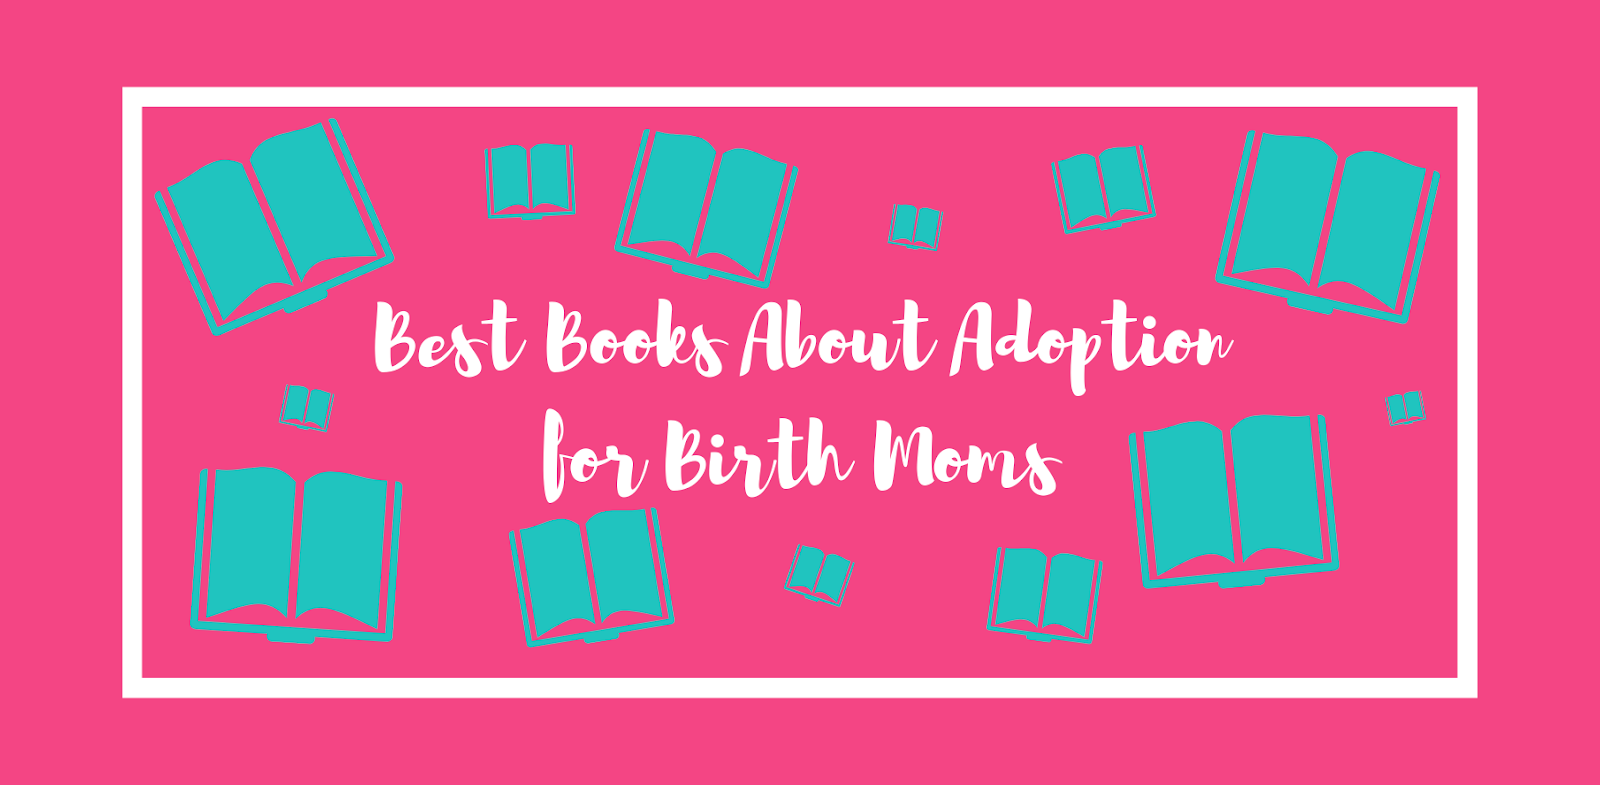 best books about adoption